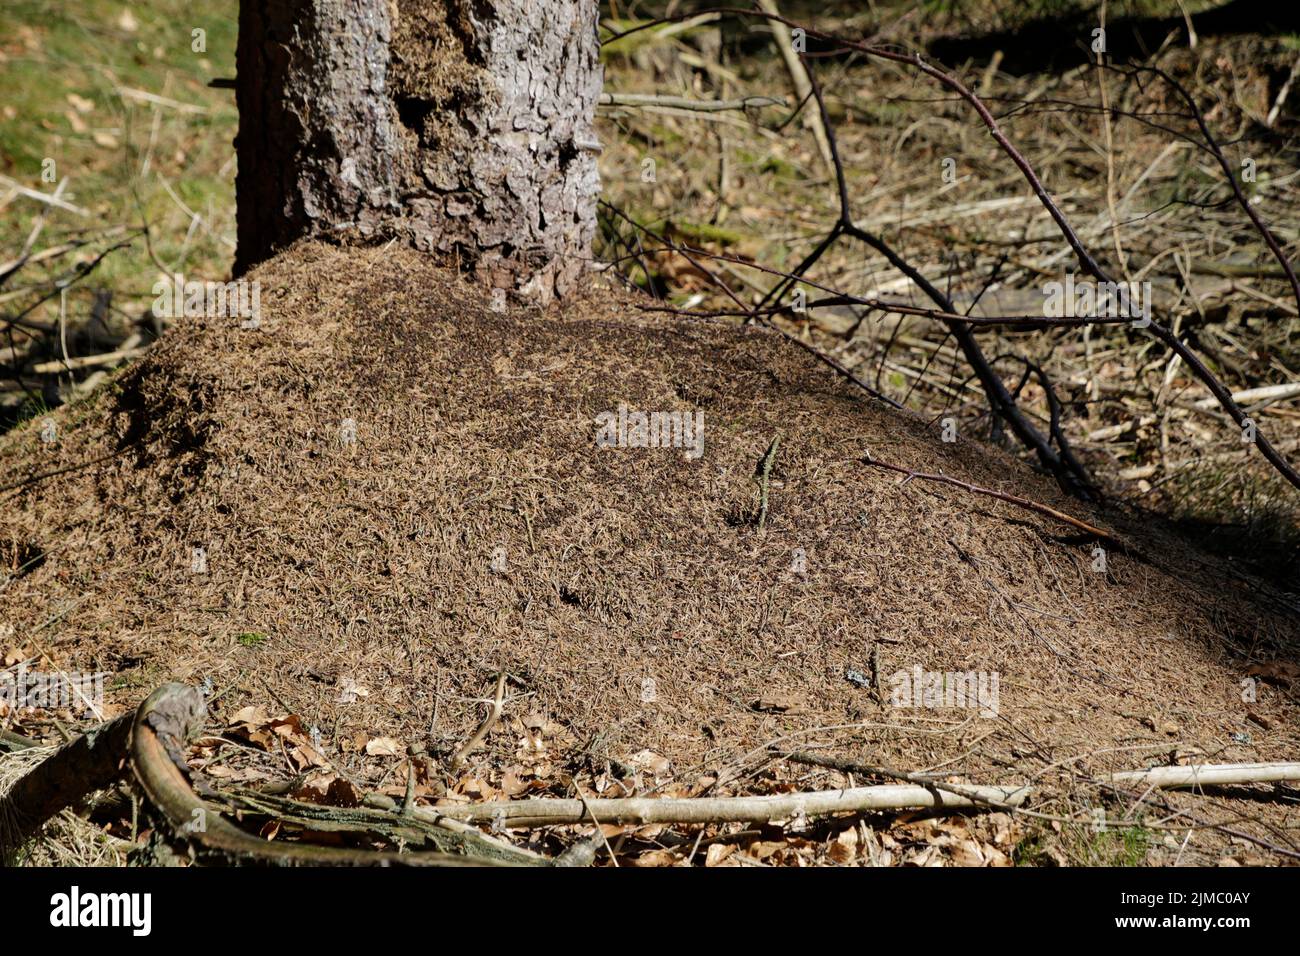 Nest of Red ants in spring (Formica rufa) Stock Photo